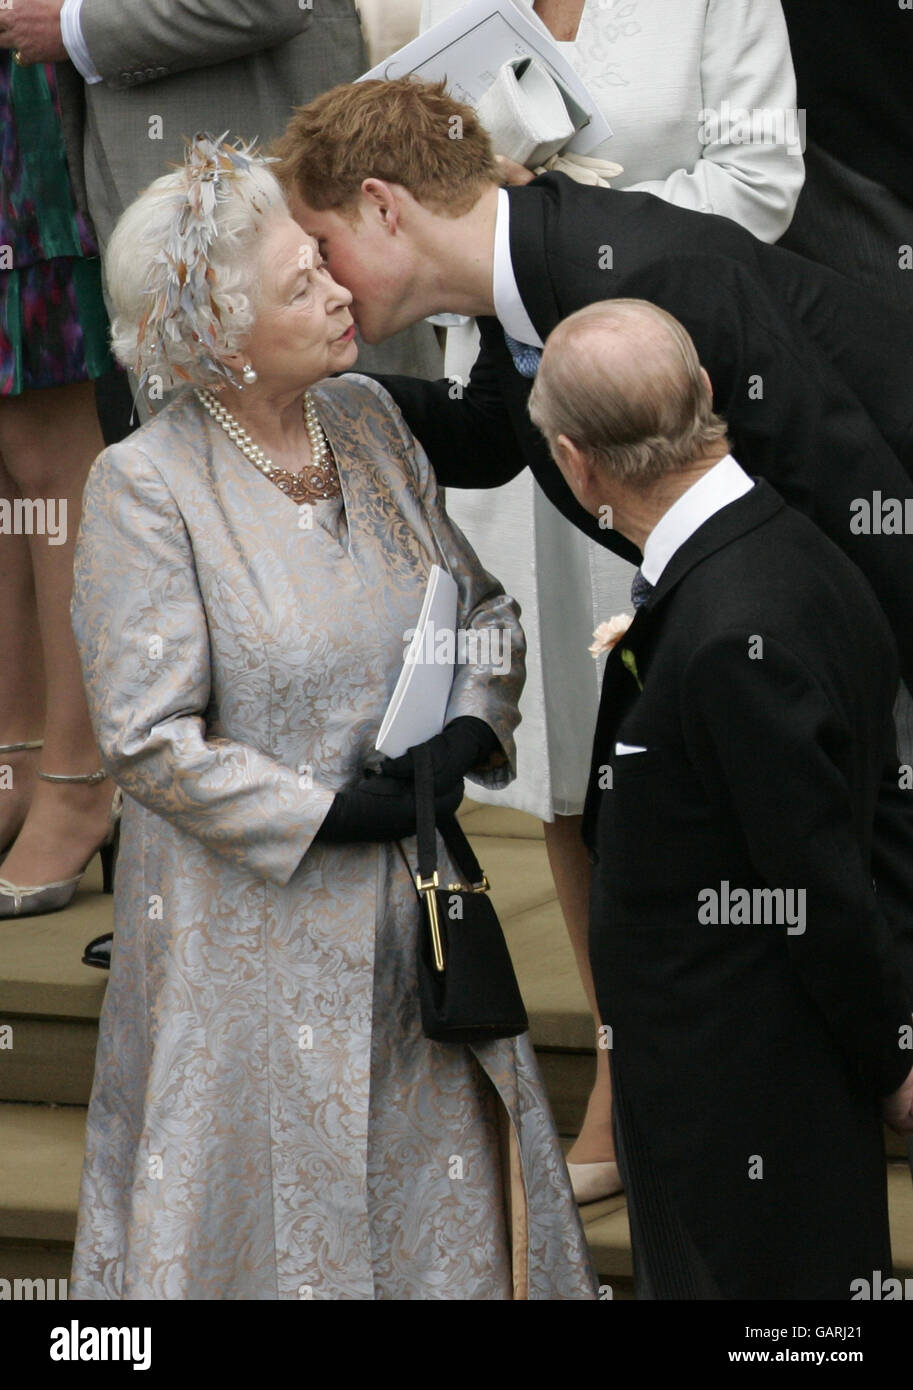 Prince Harry gives his grandmother, Queen Elizabeth II a kiss, outside St. George's Chapel in Windsor after the wedding of Peter Phillips and Autumn Kelly. Stock Photo